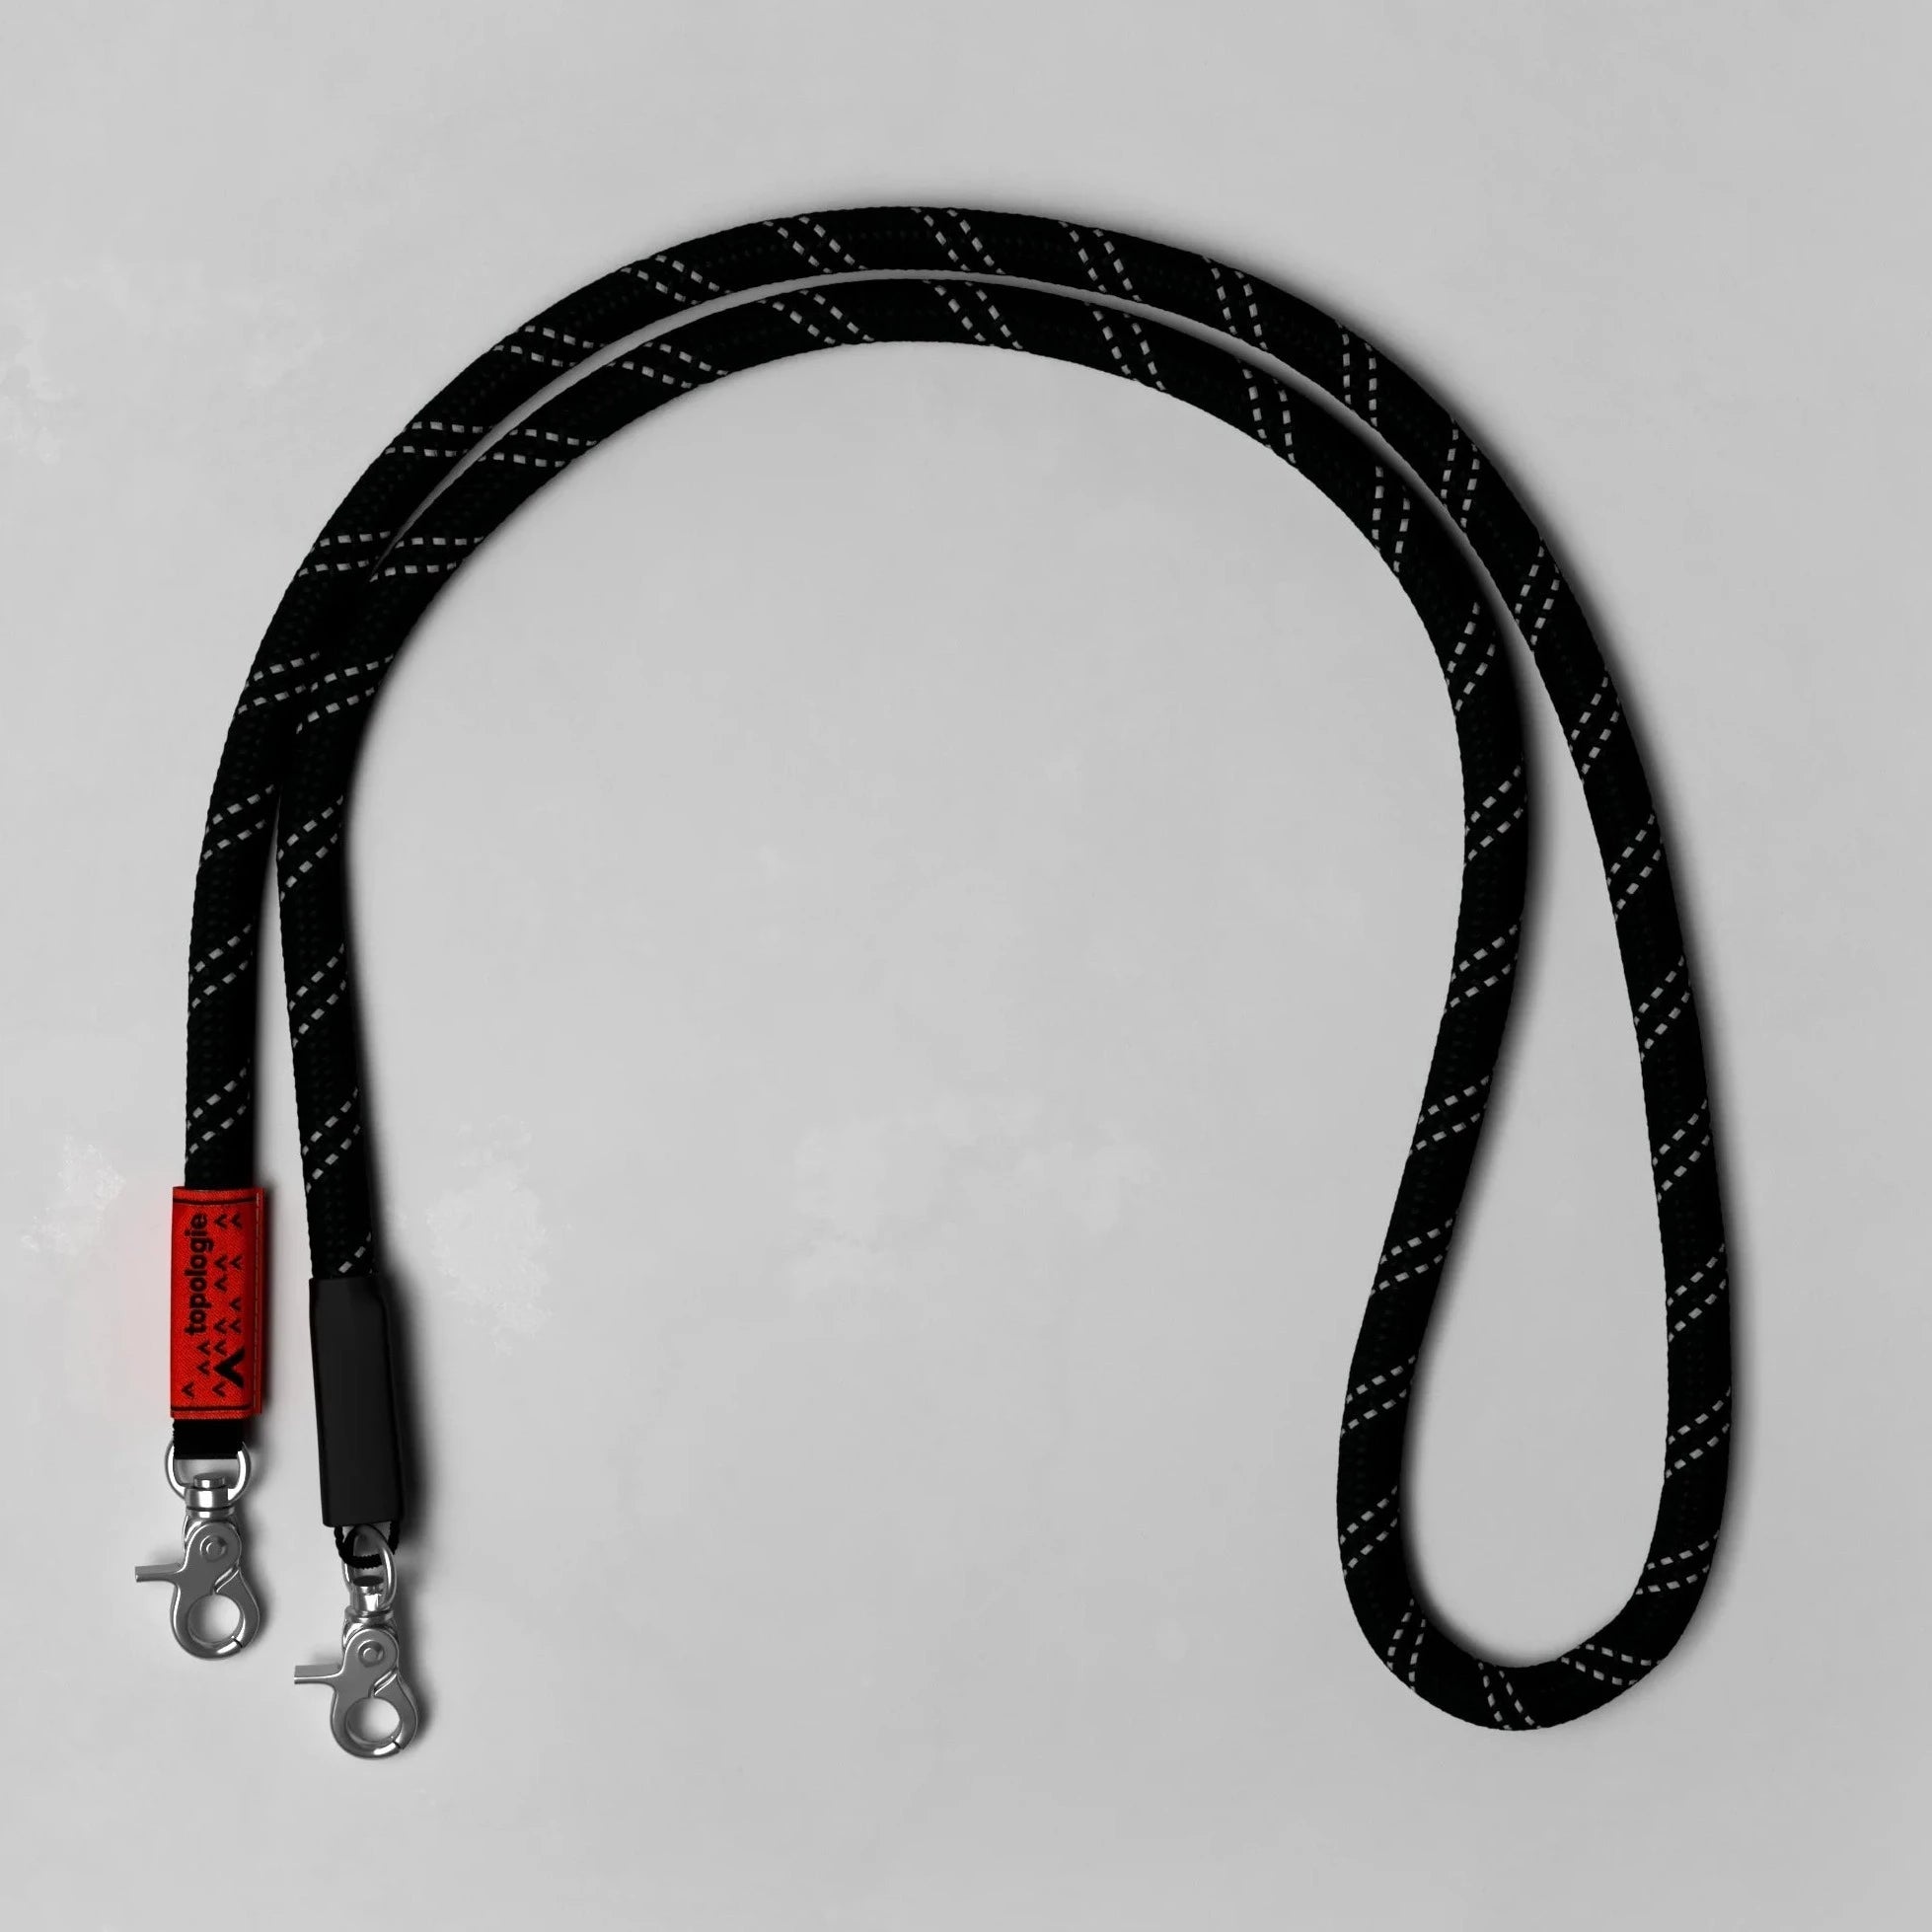 Buy UrbanTrapeze™ Cable Adjuster Online - Urban Trapeze